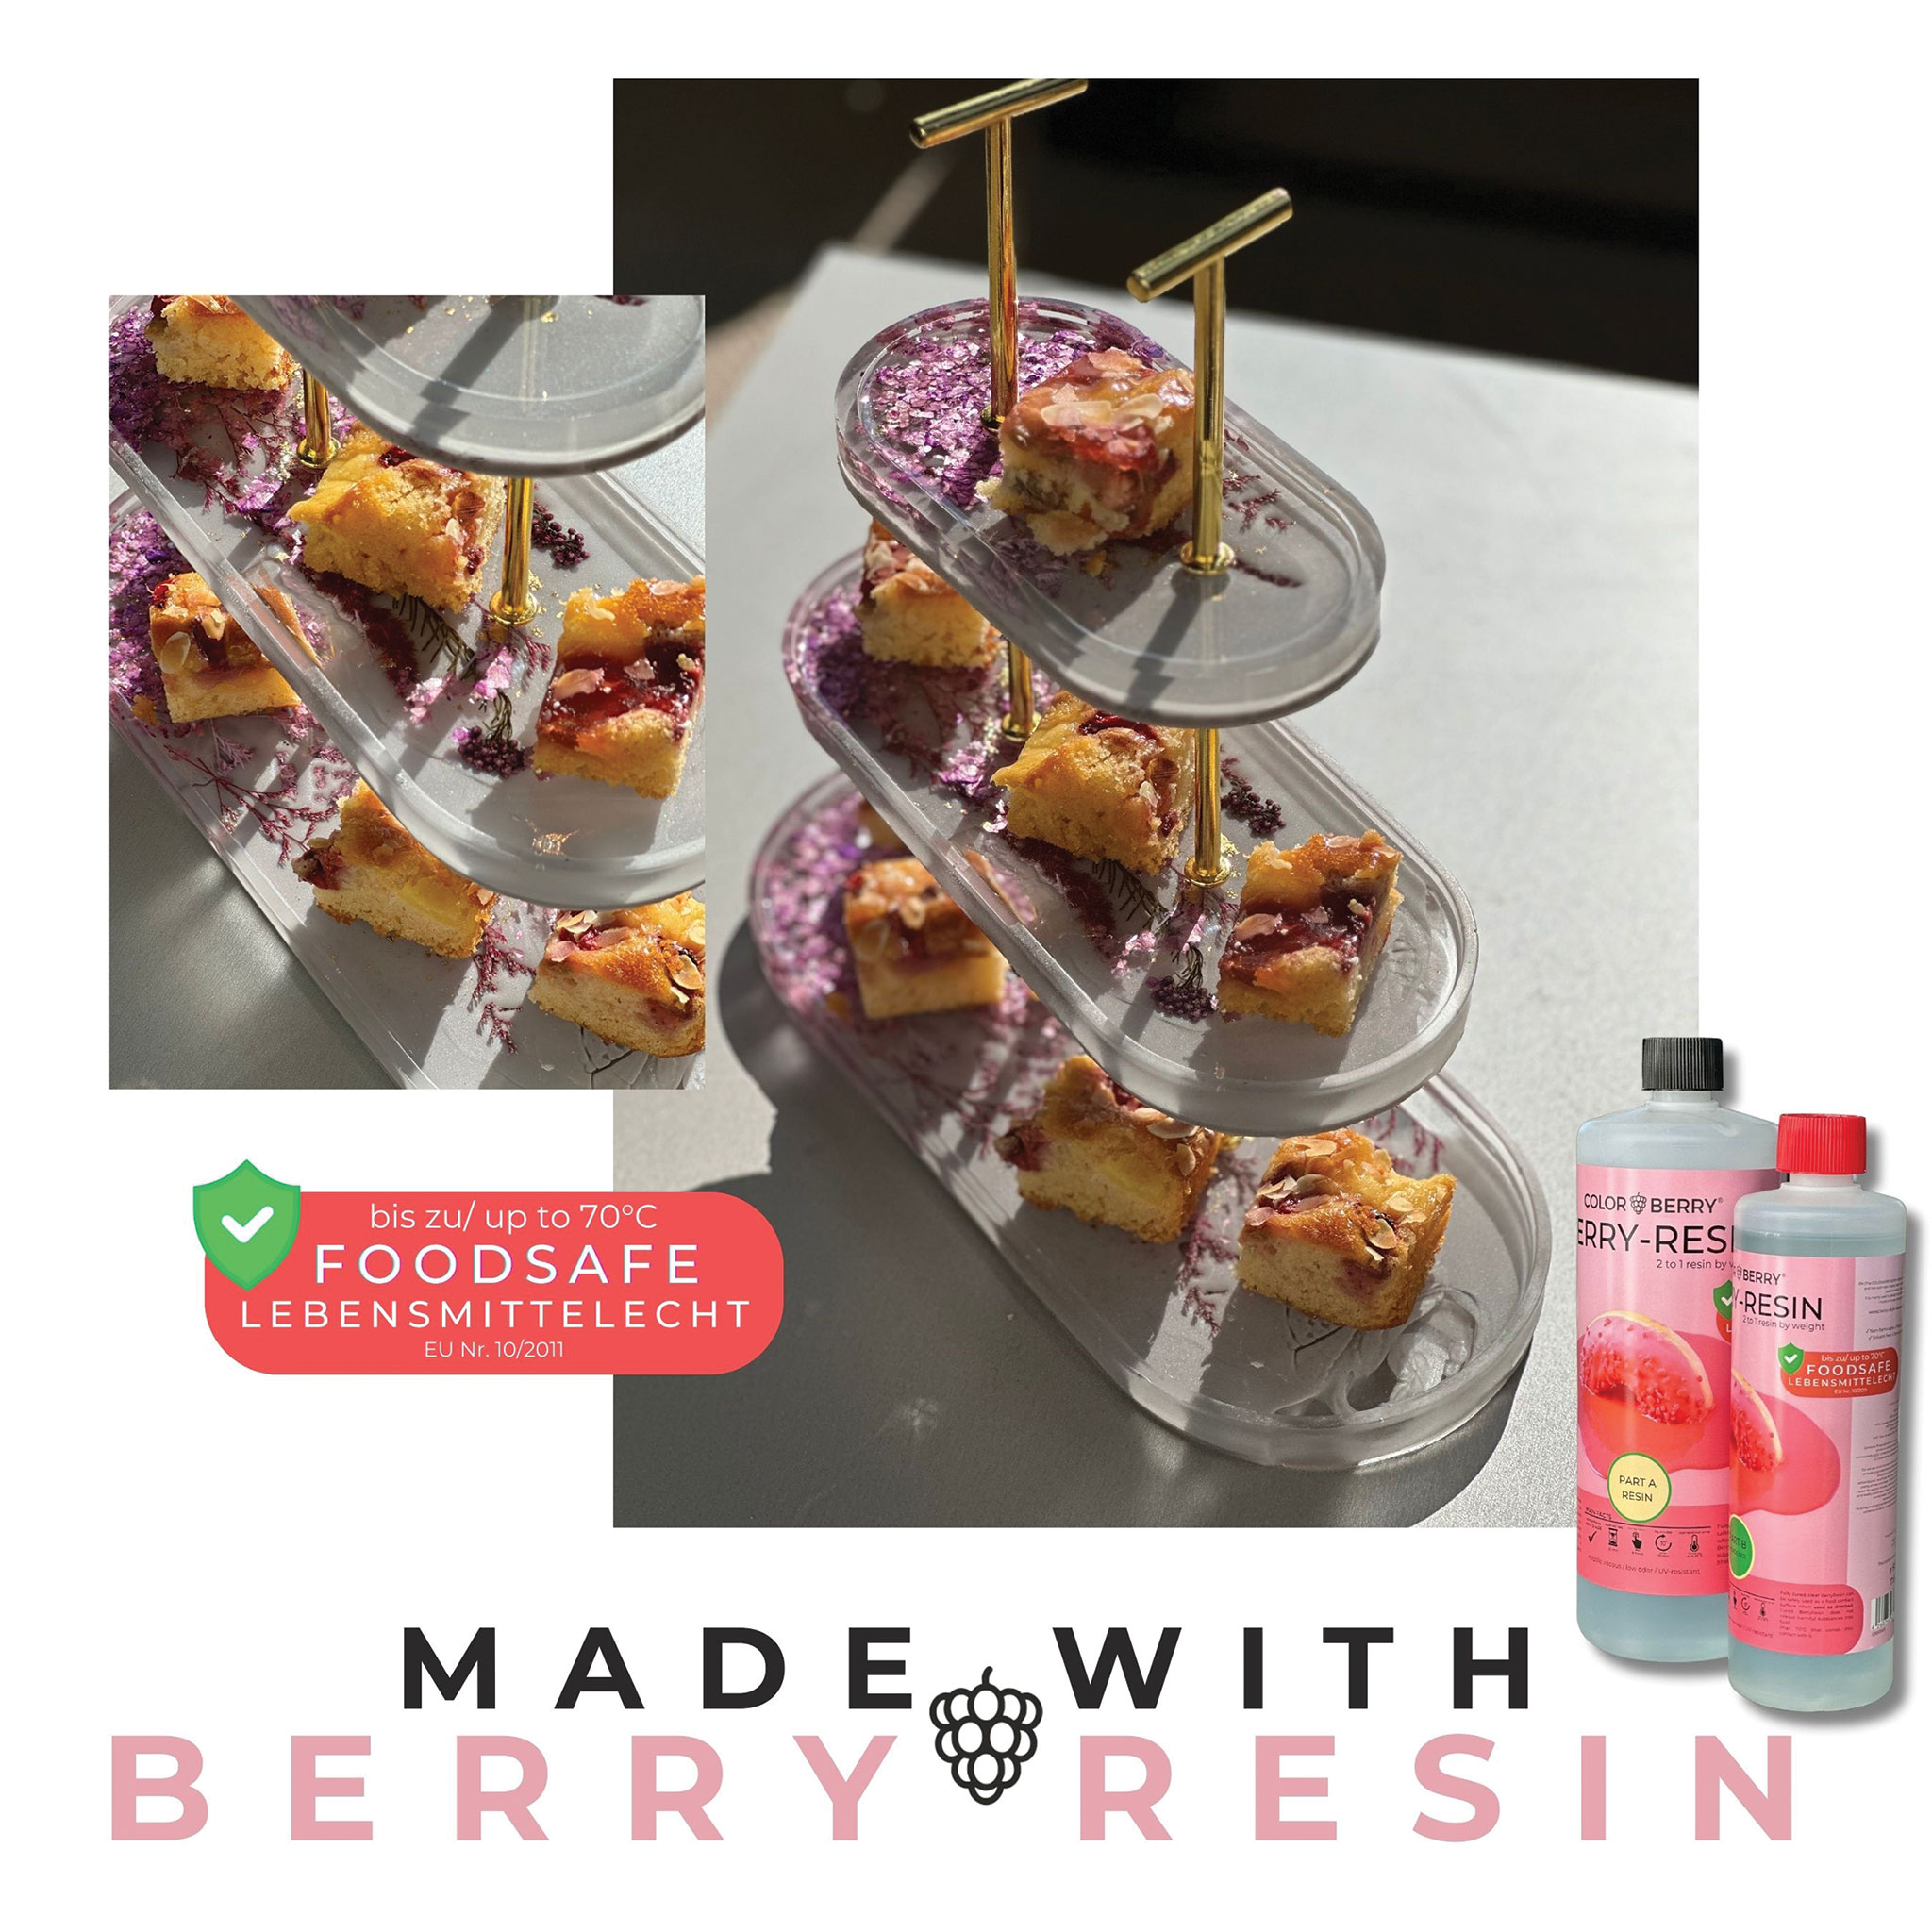 Colorberry Resin Pigment Pastes